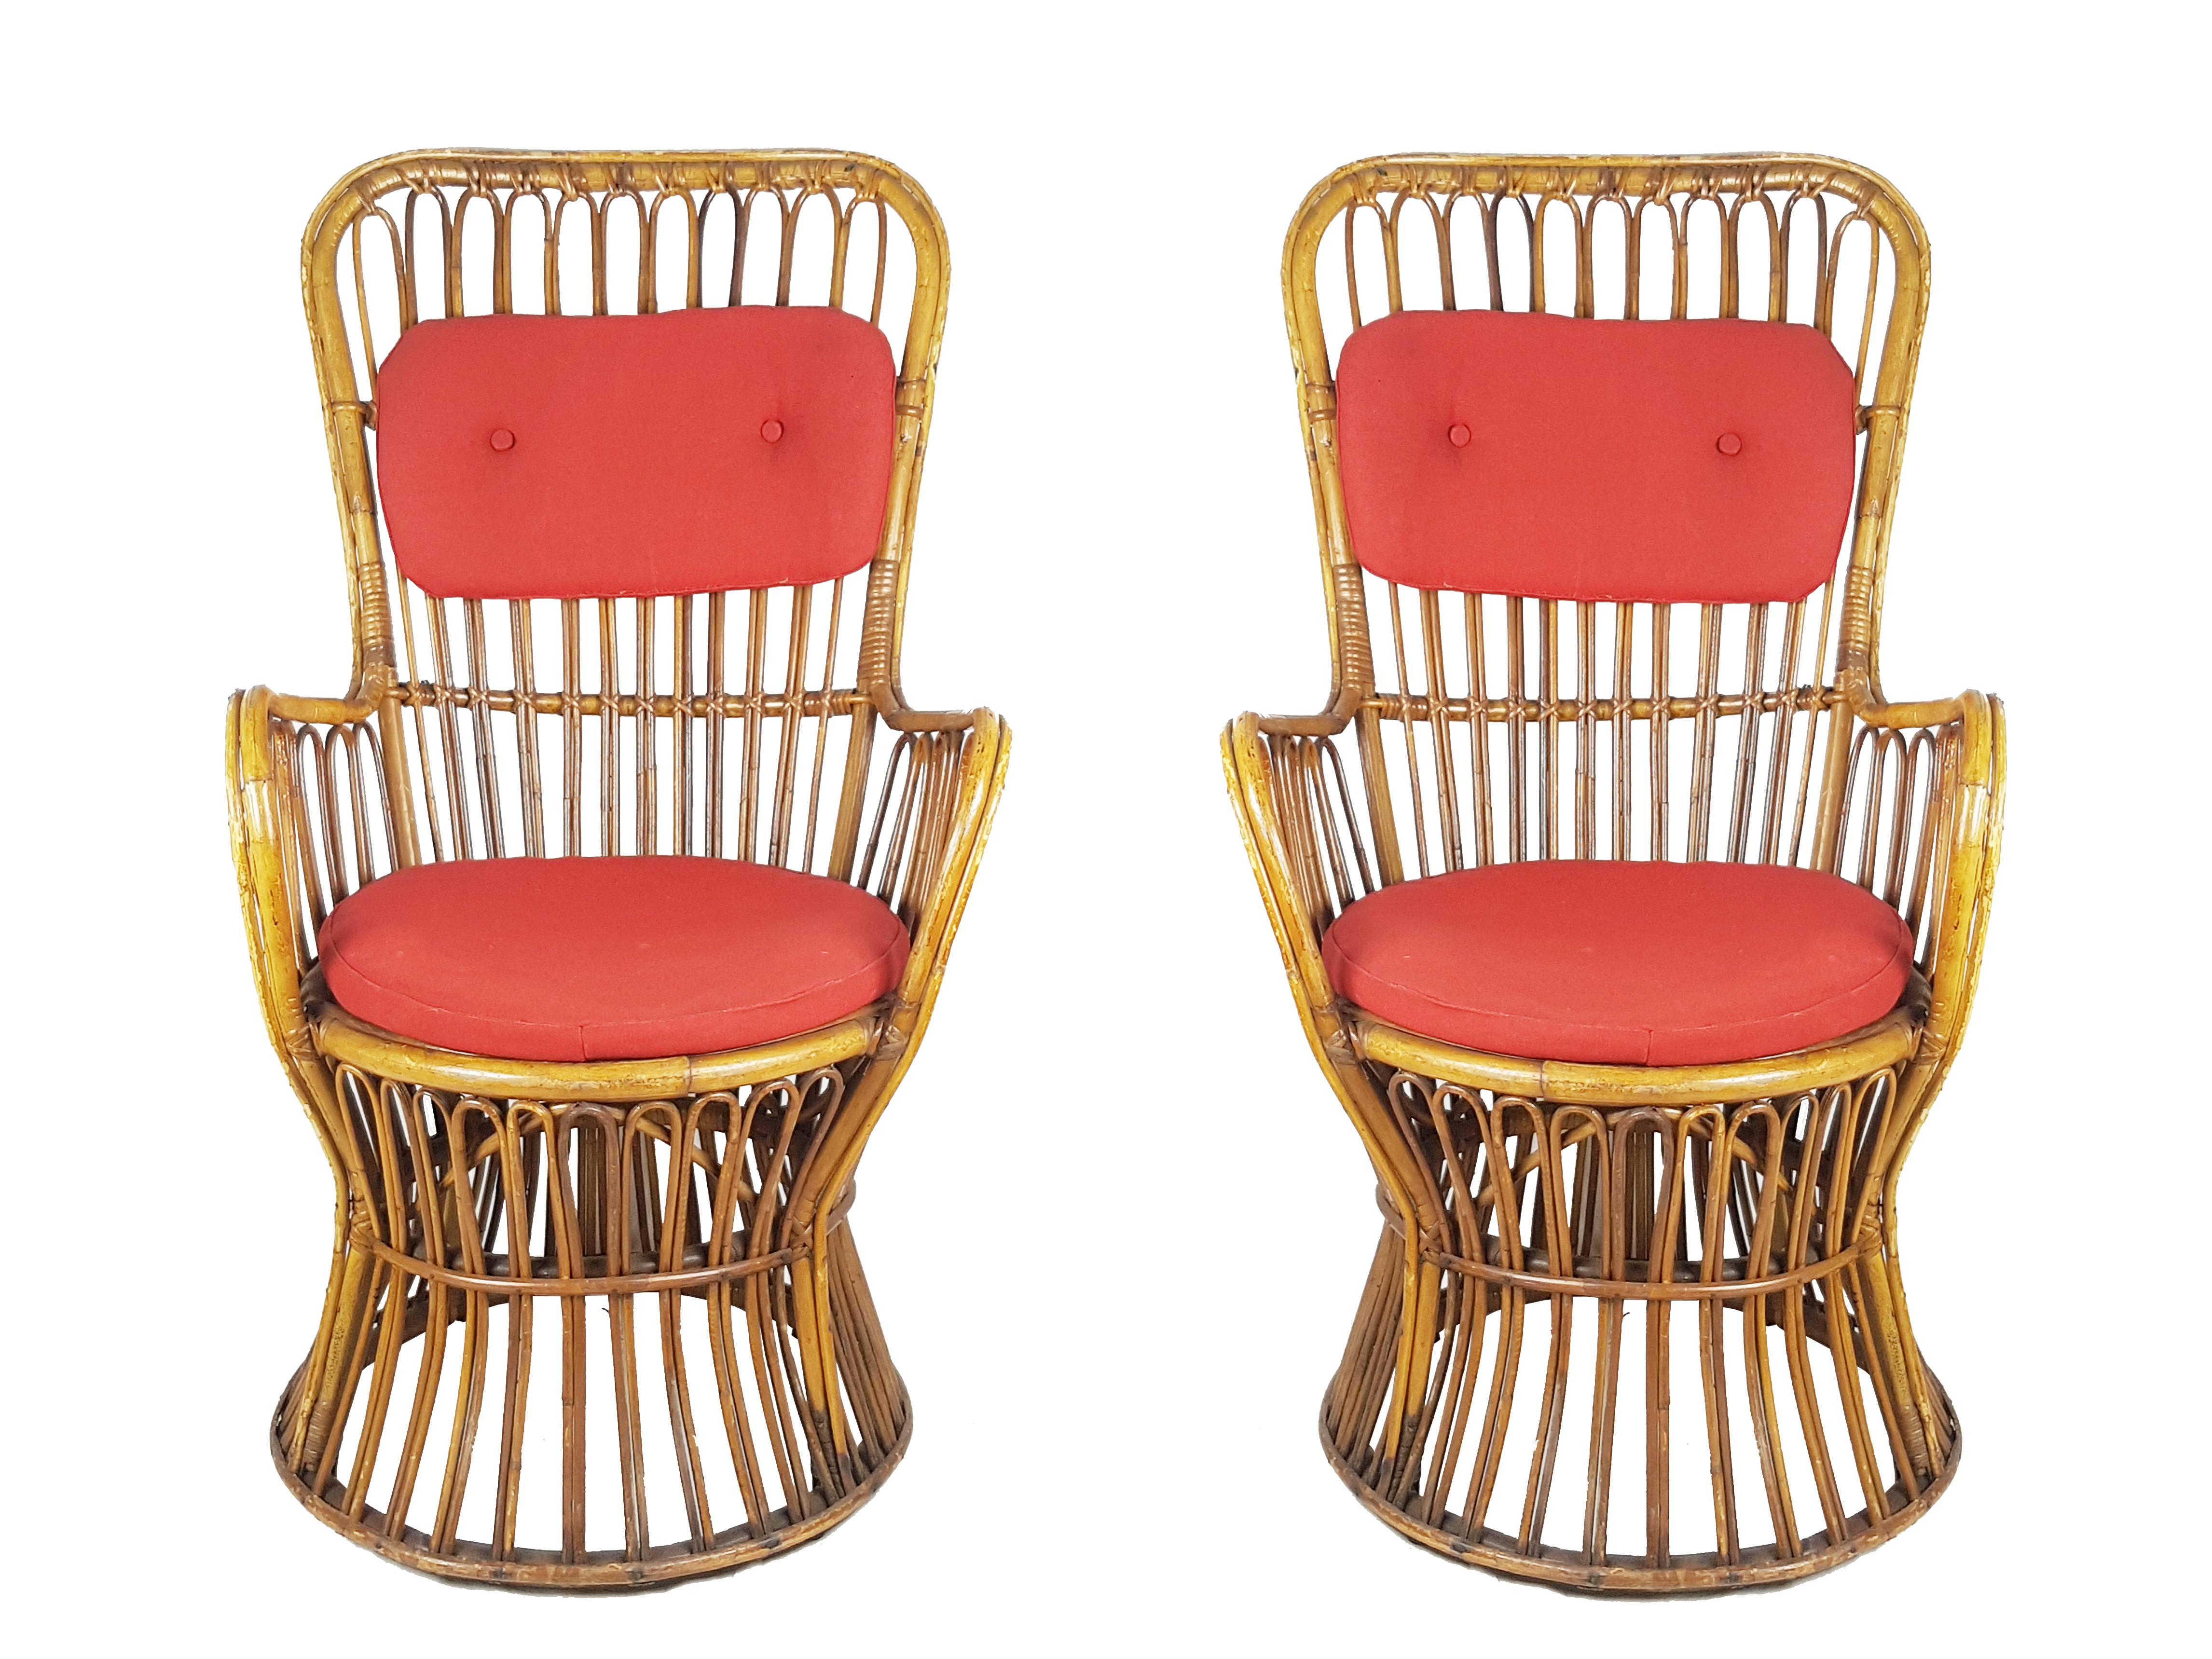 This beautiful pair of rattan and rush armchairs was produced in Italy in the late 1950s. Their high quality and fine design resemble similar examples of the contemporary Azucena production. The chairs feature their original red fabric pillows and